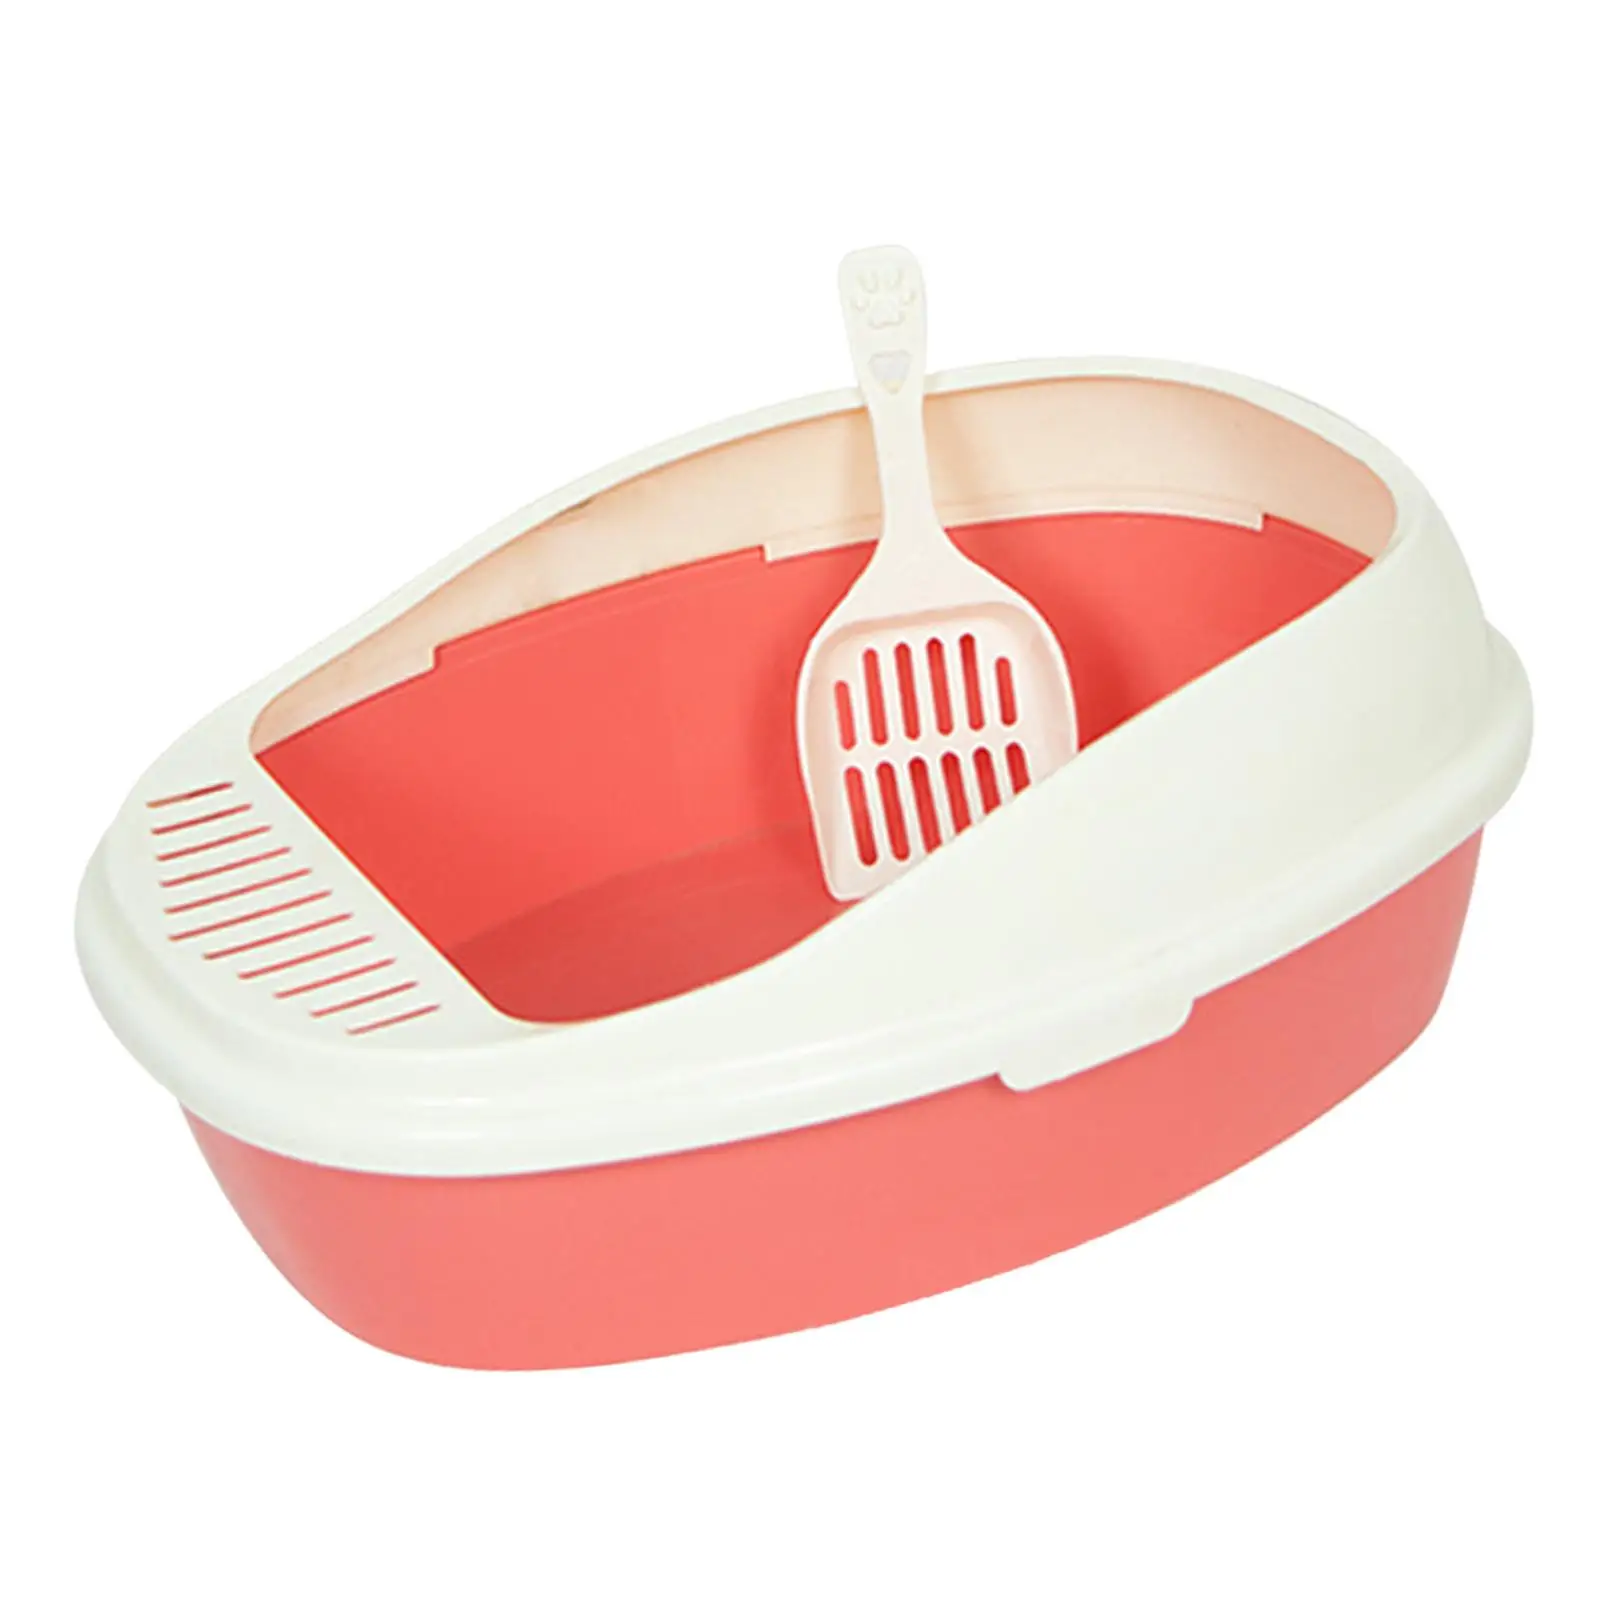 Cat Litter Box Toilet High Sided Large Cat Sand Box Semi Enclosed Durable Pet Bedpan for All Kinds of Cat Litter Pets Supplies